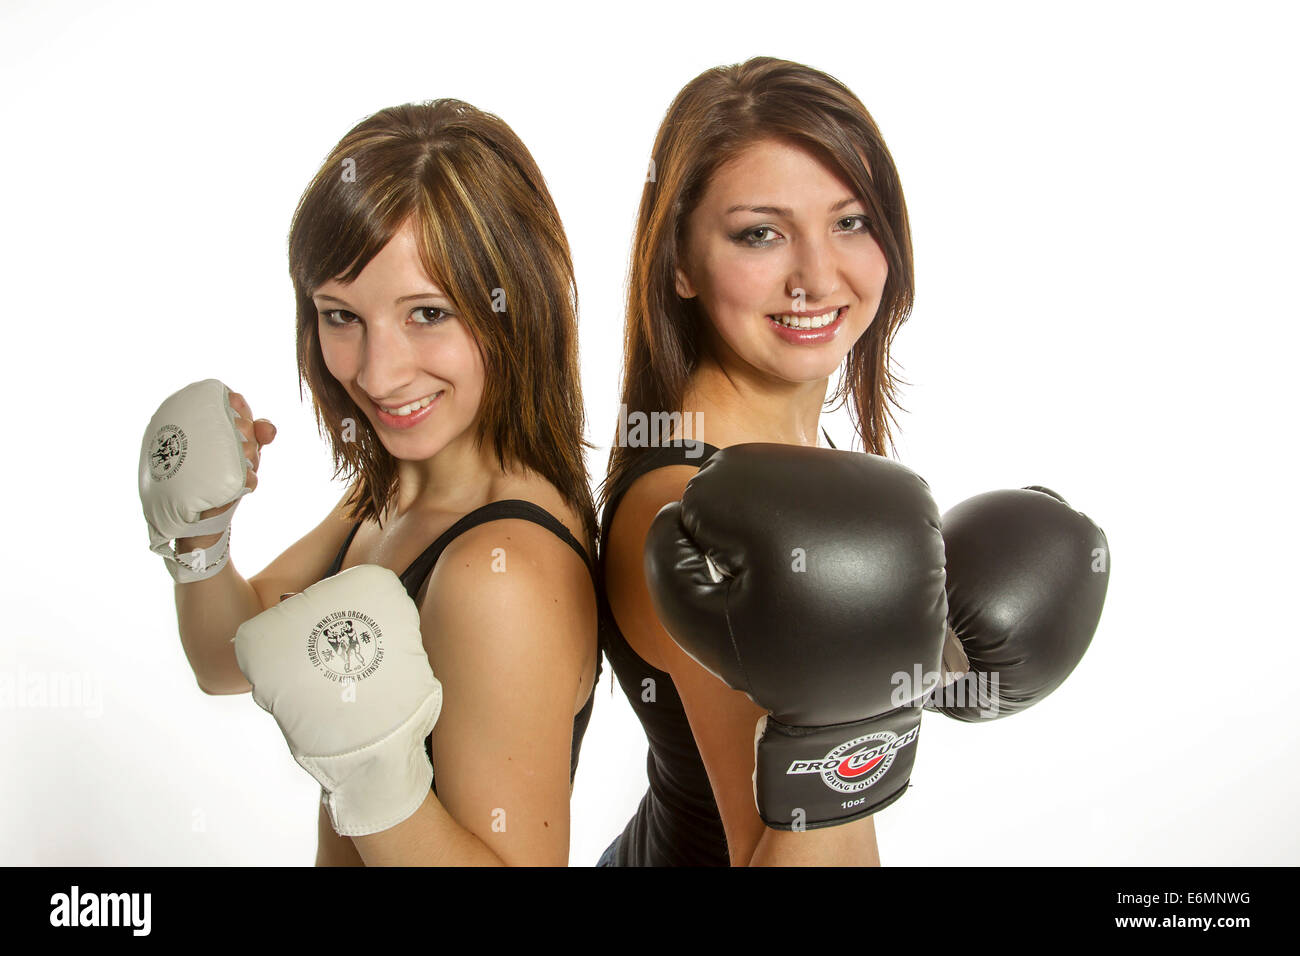 Two young women in sports clothing, one wearing Wing Chun gloves, the other wearing boxing gloves Stock Photo